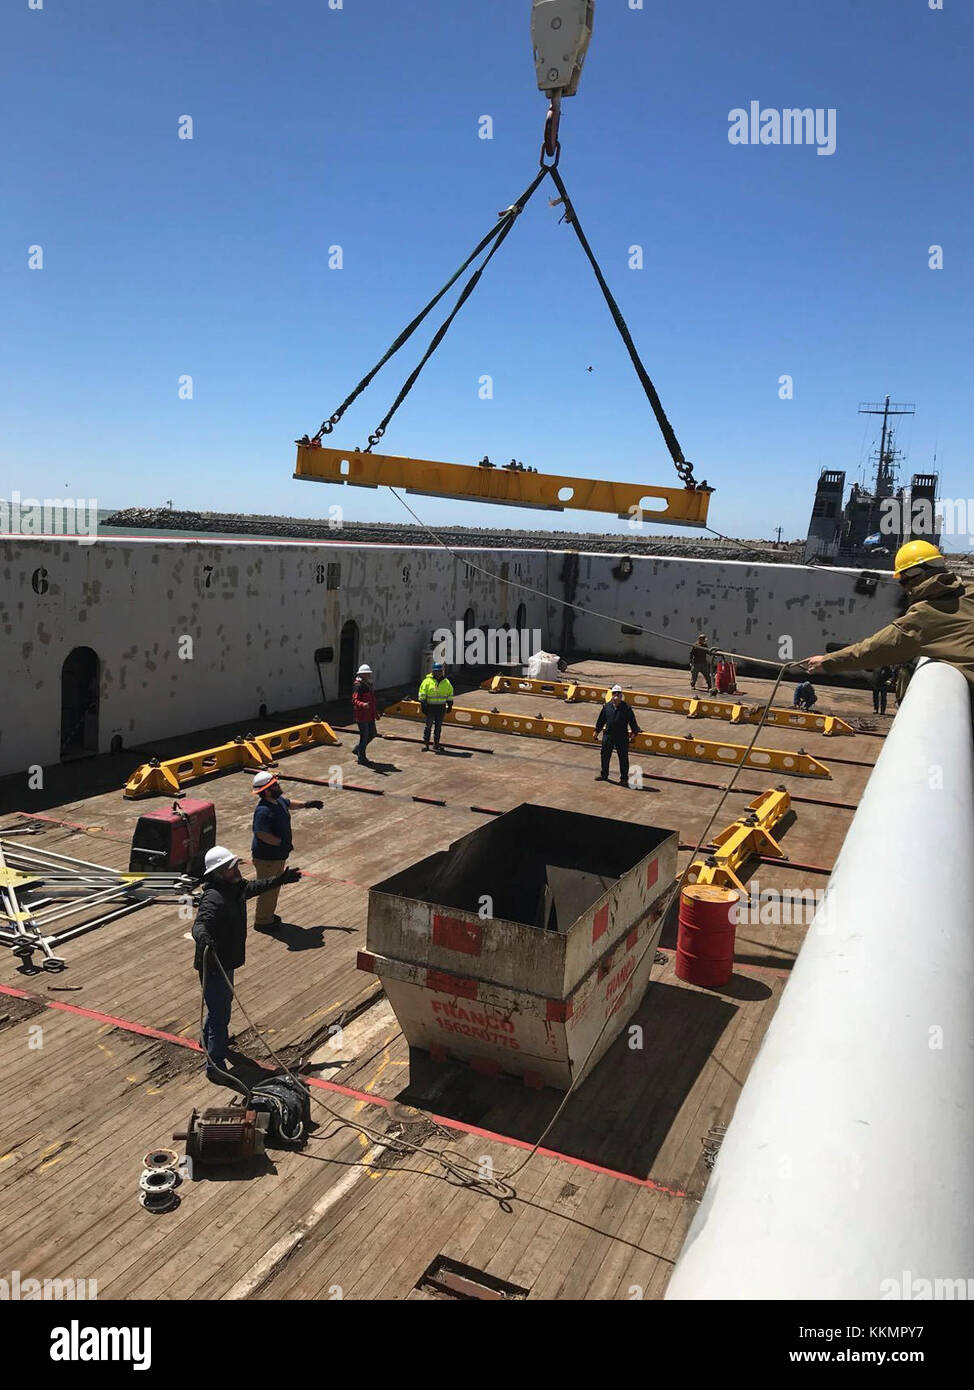 COMODORO RIVADAVIA, Argentina (Nov. 23, 2017) Undersea Rescue Command (URC) and Argentine construction workers prepare the motor vessel Sophie Siem for the installation of the Submarine Rescue Diving and Recompression System (SRDRS) which operates the deep diving rescue vehicle, the Pressurized Rescue Module (PRM). Undersea Rescue Command, the U.S. Navy's only submarine rescue unit, mobilized to support the Argentine government's search and rescue efforts for the Argentine Navy diesel-electric submarine ARA San Juan. (U.S. Navy photo by Lt. Karl Schonberg/Released) Stock Photo